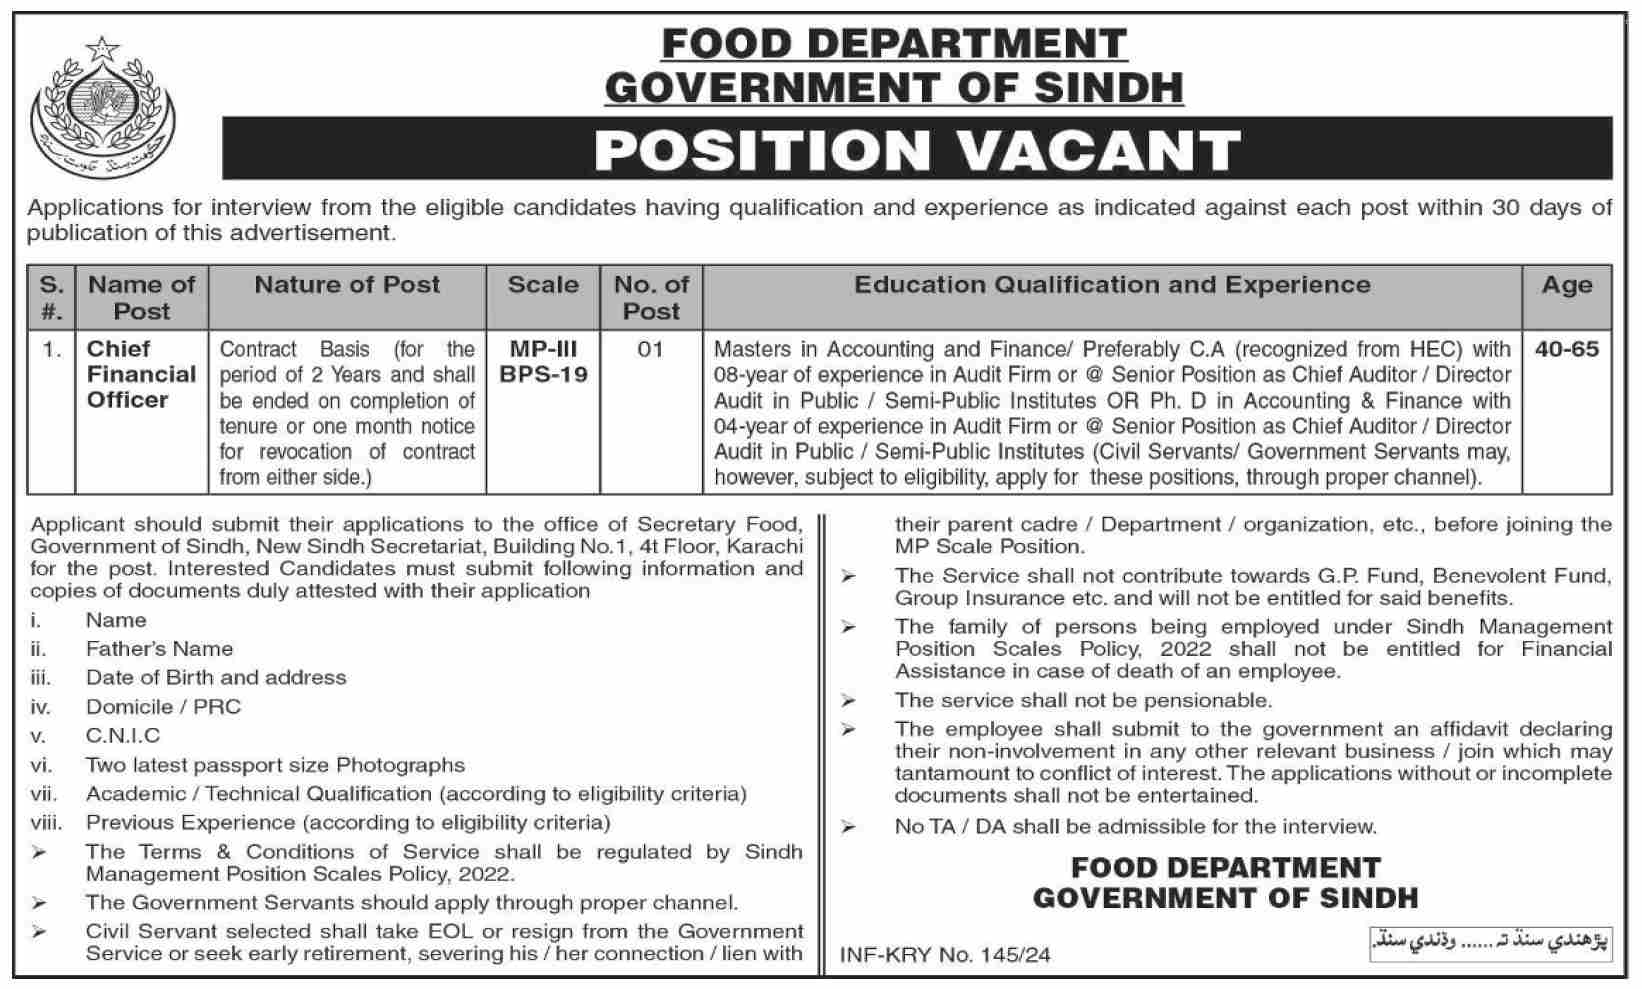 Food Department Government of Sindh Jobs For Master Degree Holders